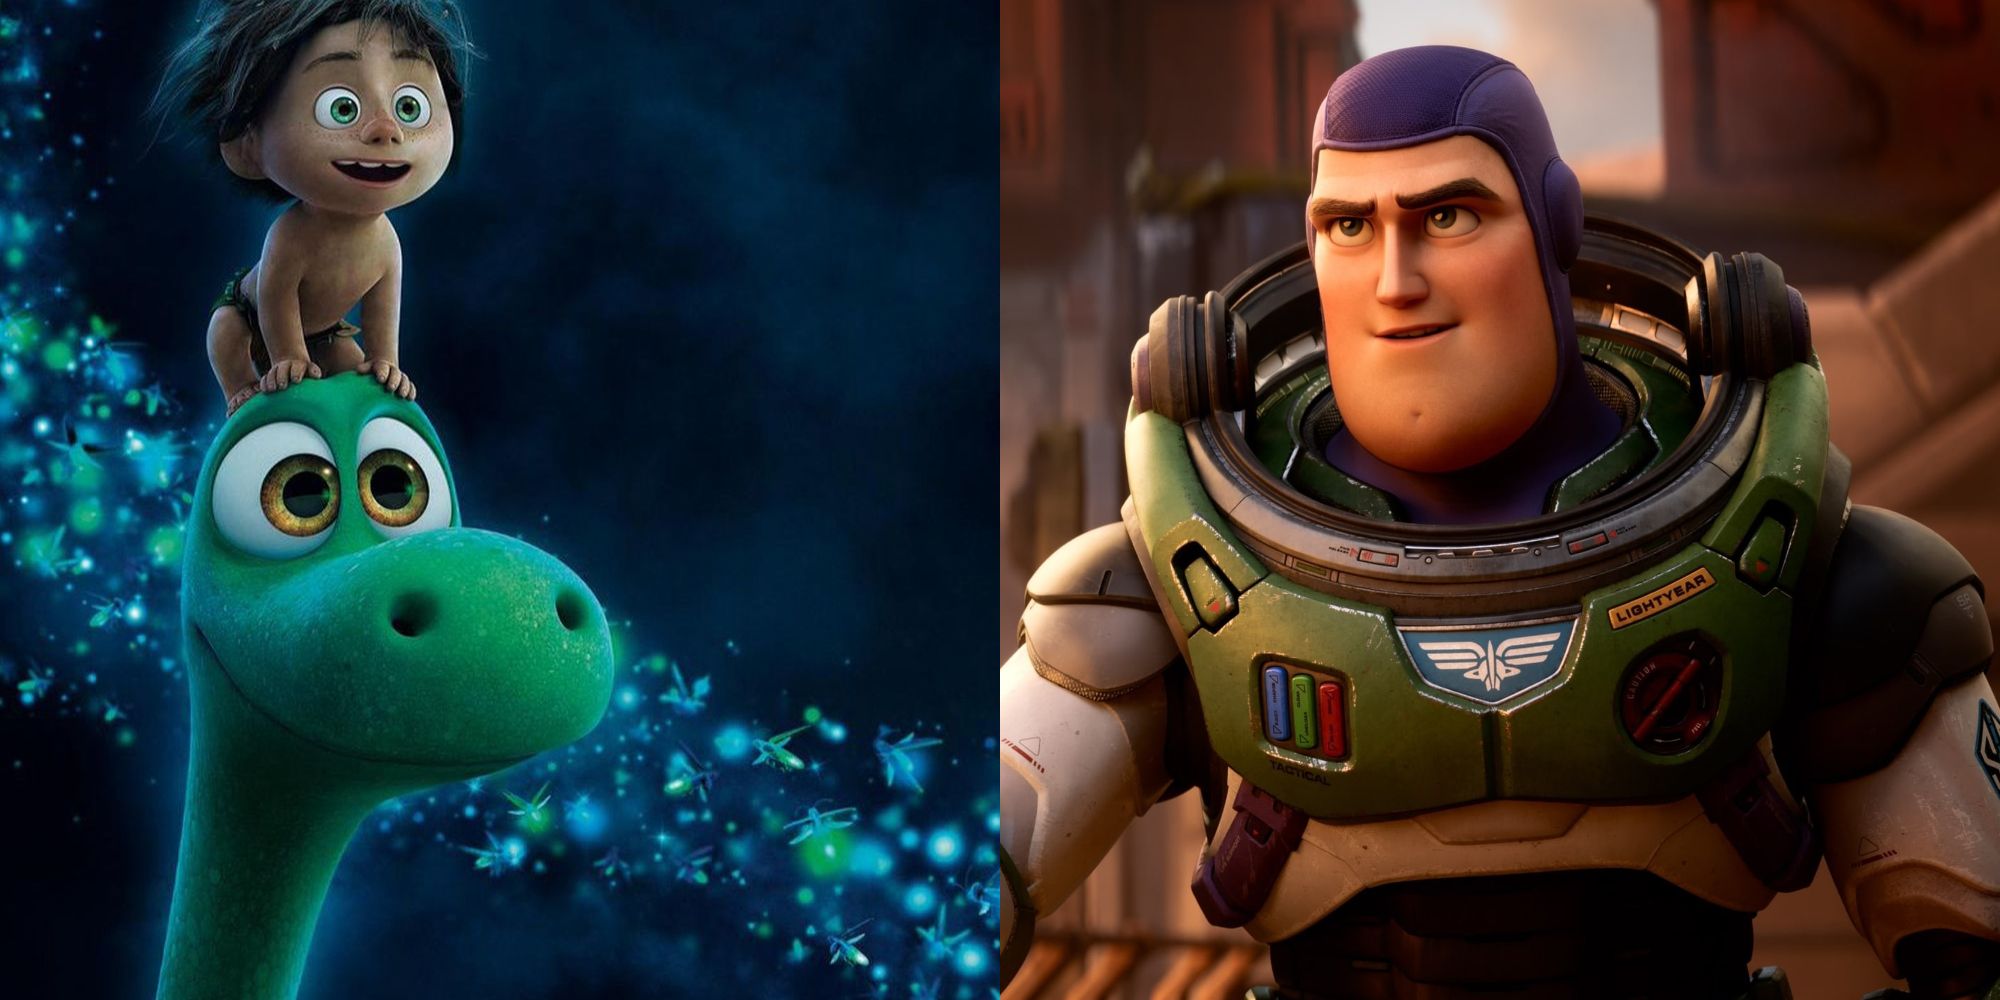 Split image showing Arlo and Spot in The Good Dinosaur and Buzz in Lightyear.